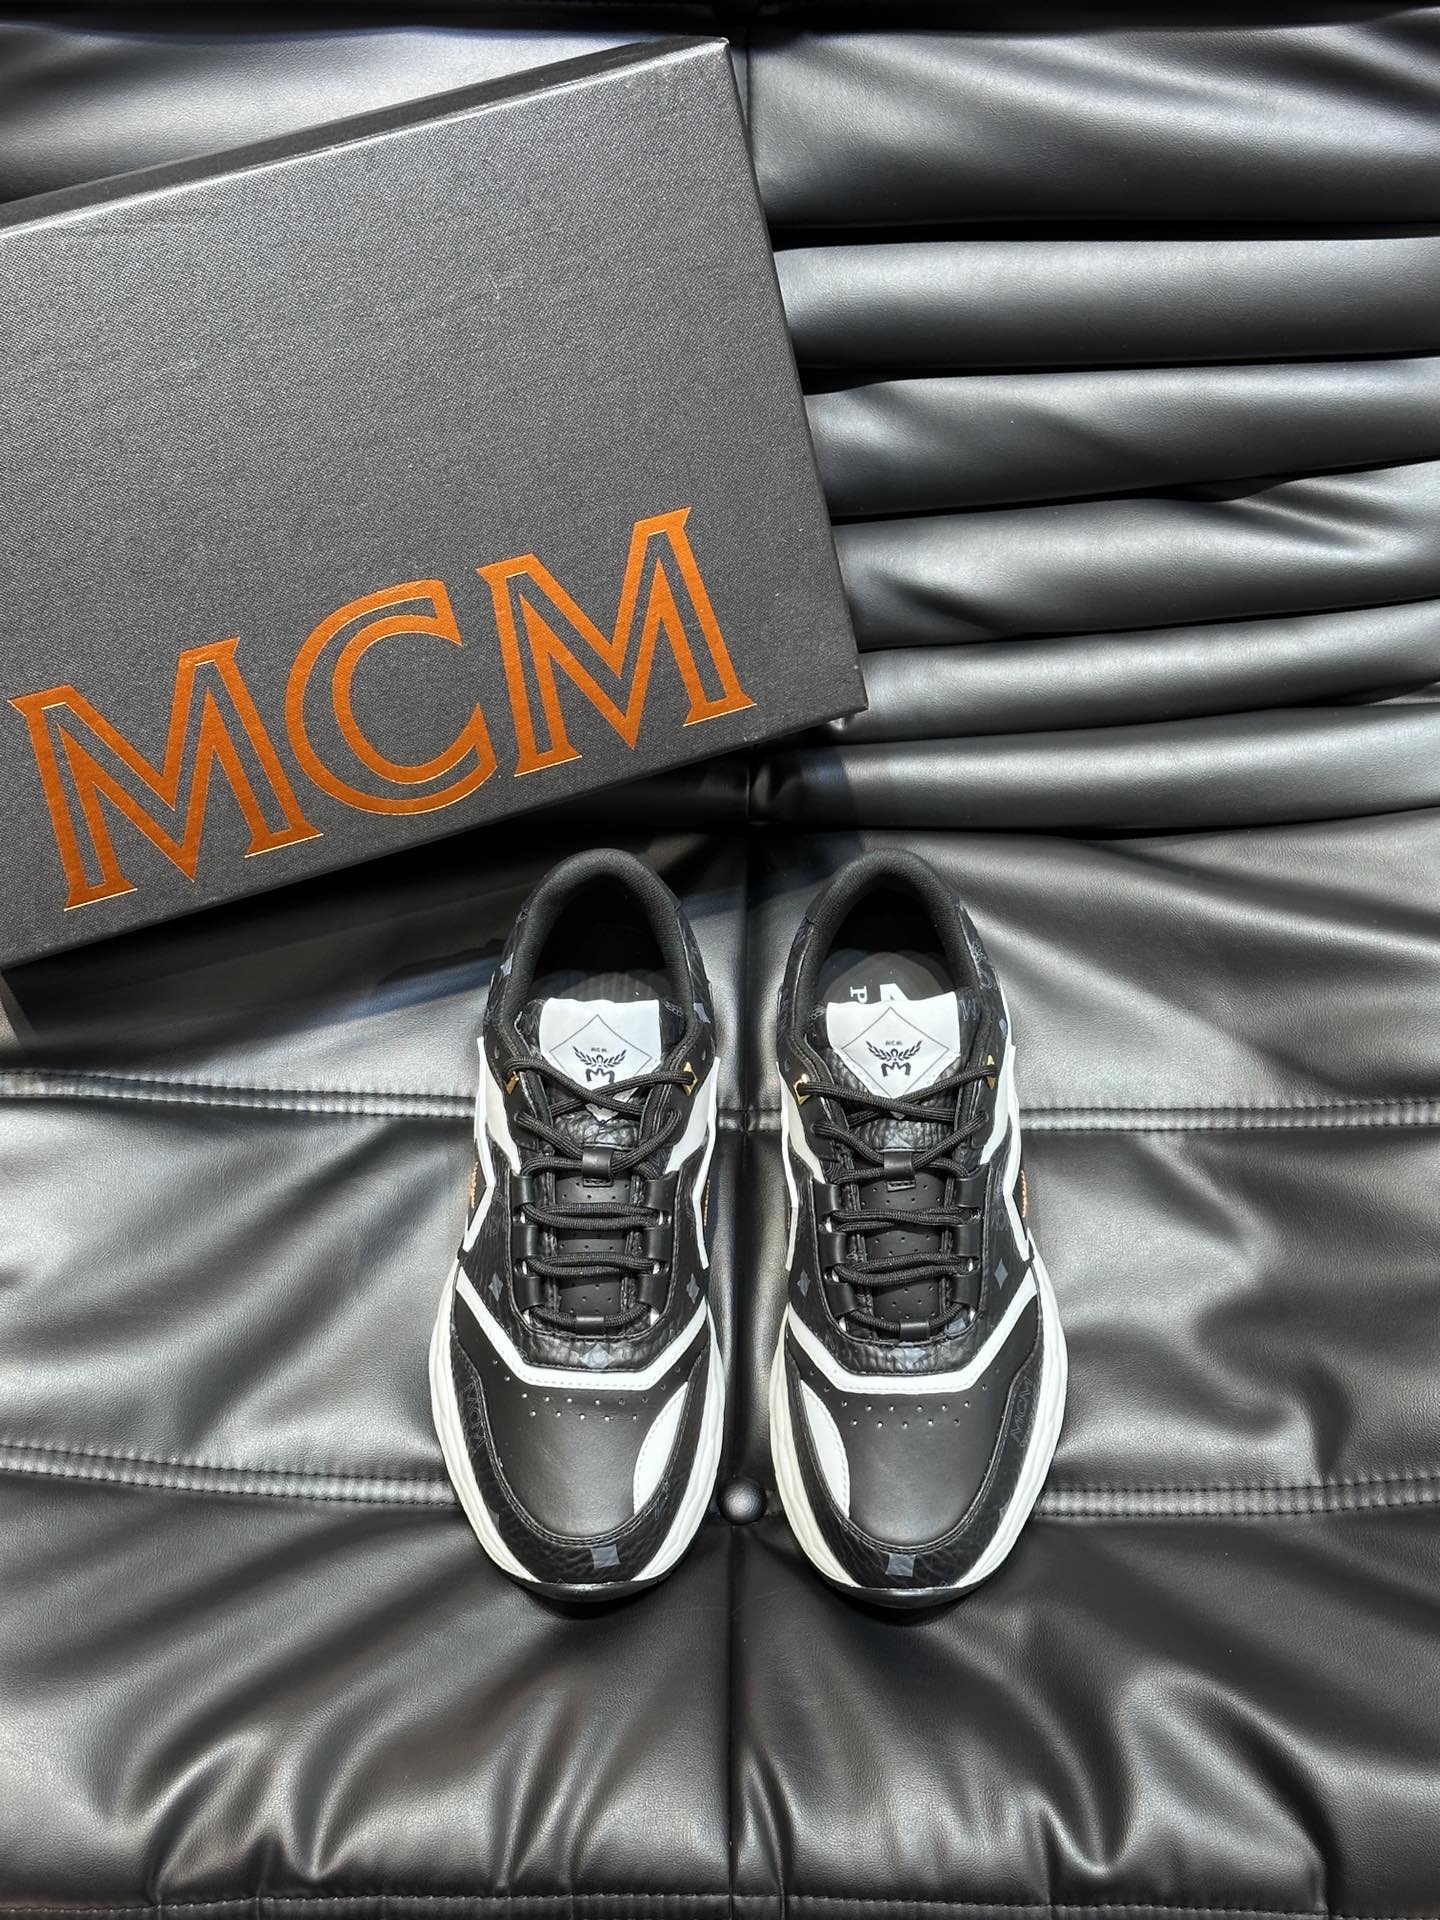 MCM Shoes Sneakers Designer Fashion Replica
 Men Spring/Summer Collection Vintage Casual